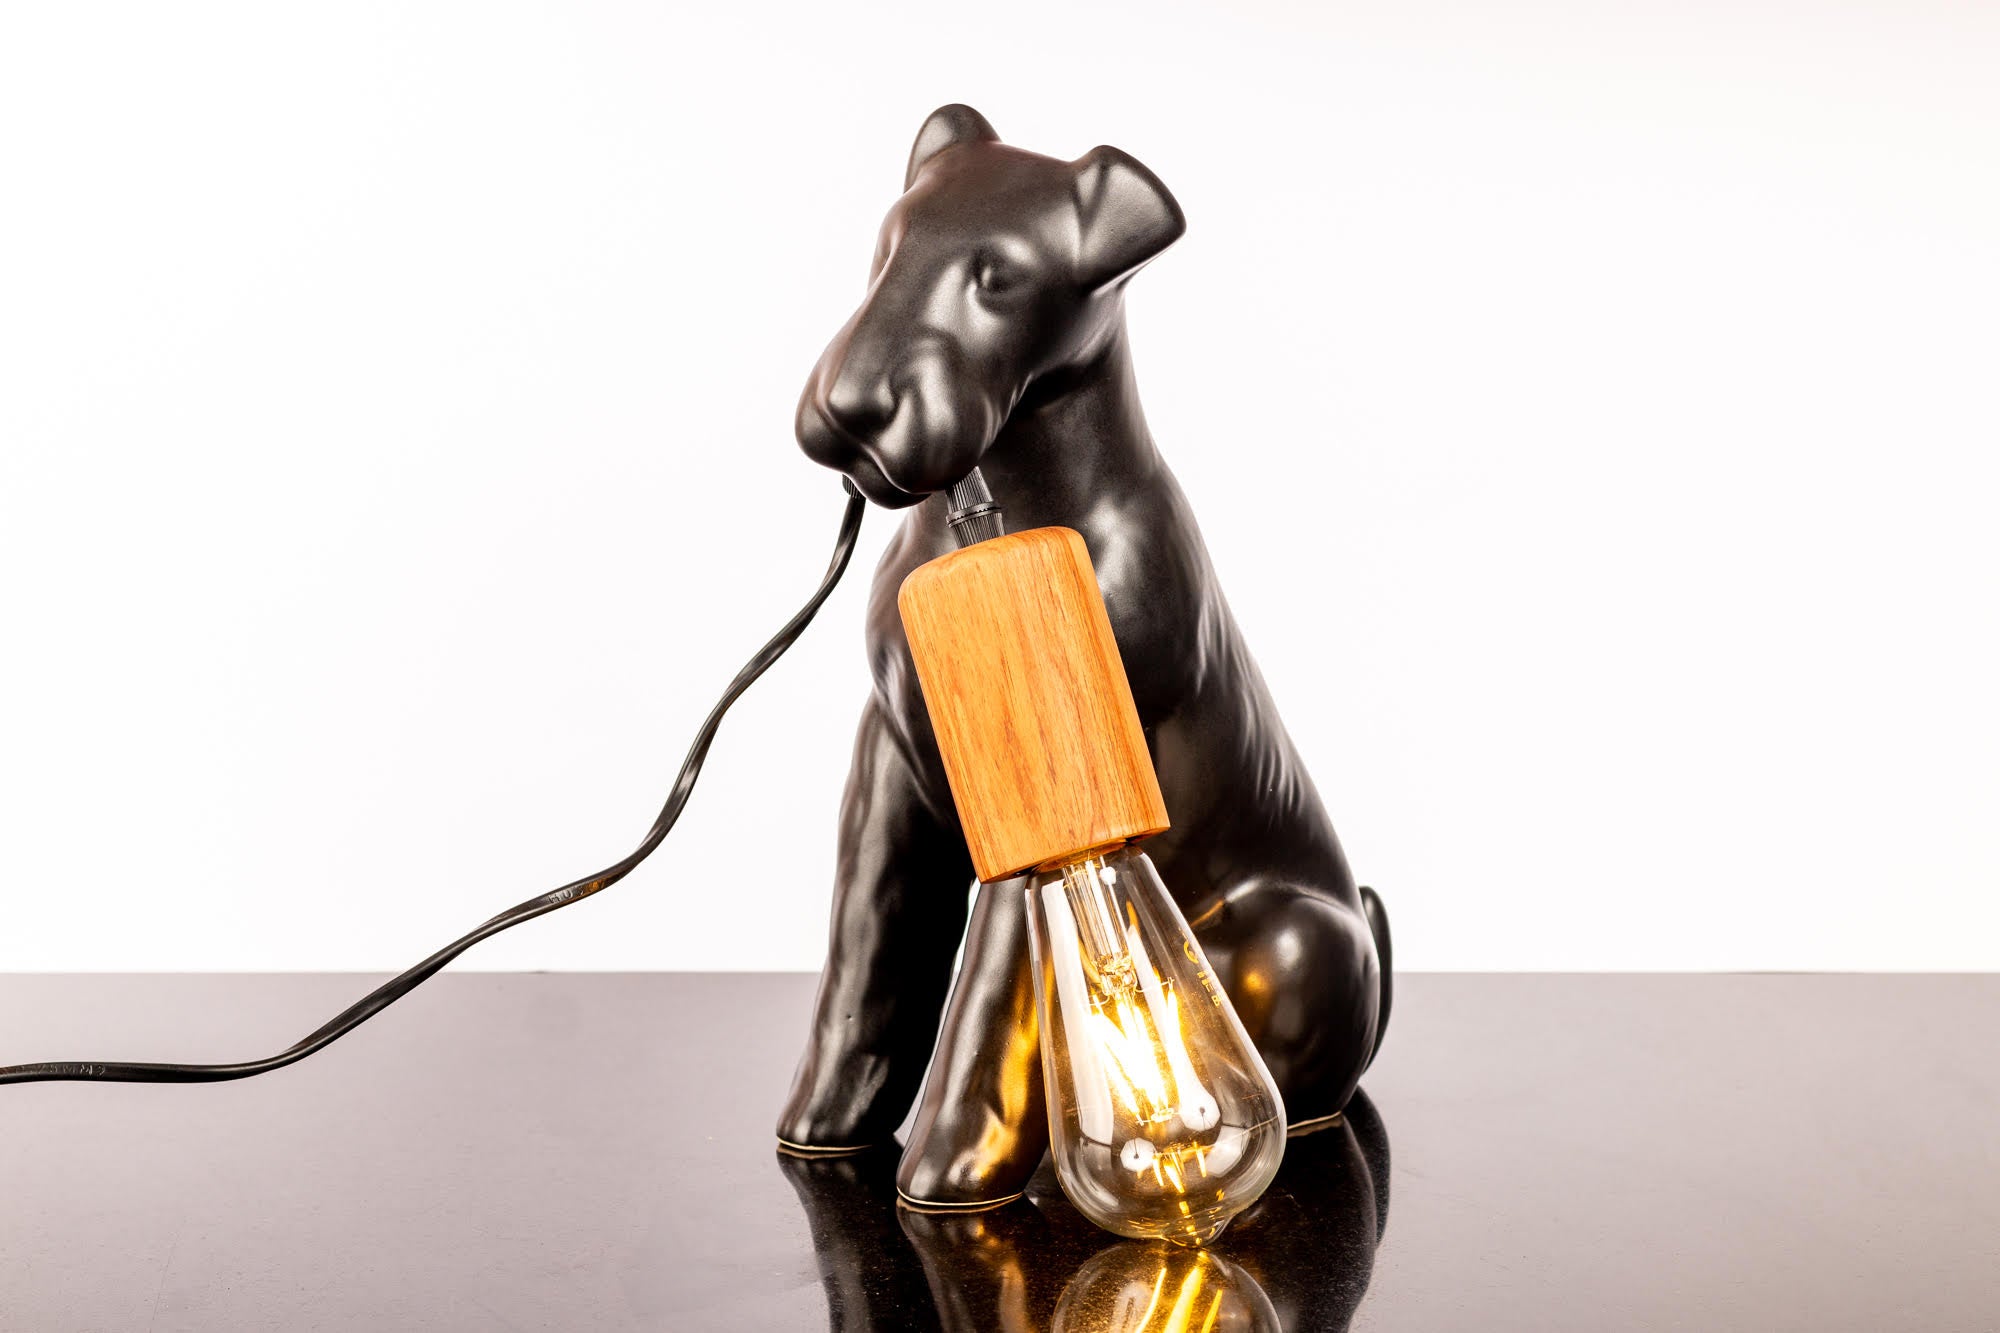 AIREDALE TABLE LAMP - Rialheim A table lamp shaped like an Airedale dog holding the bulb